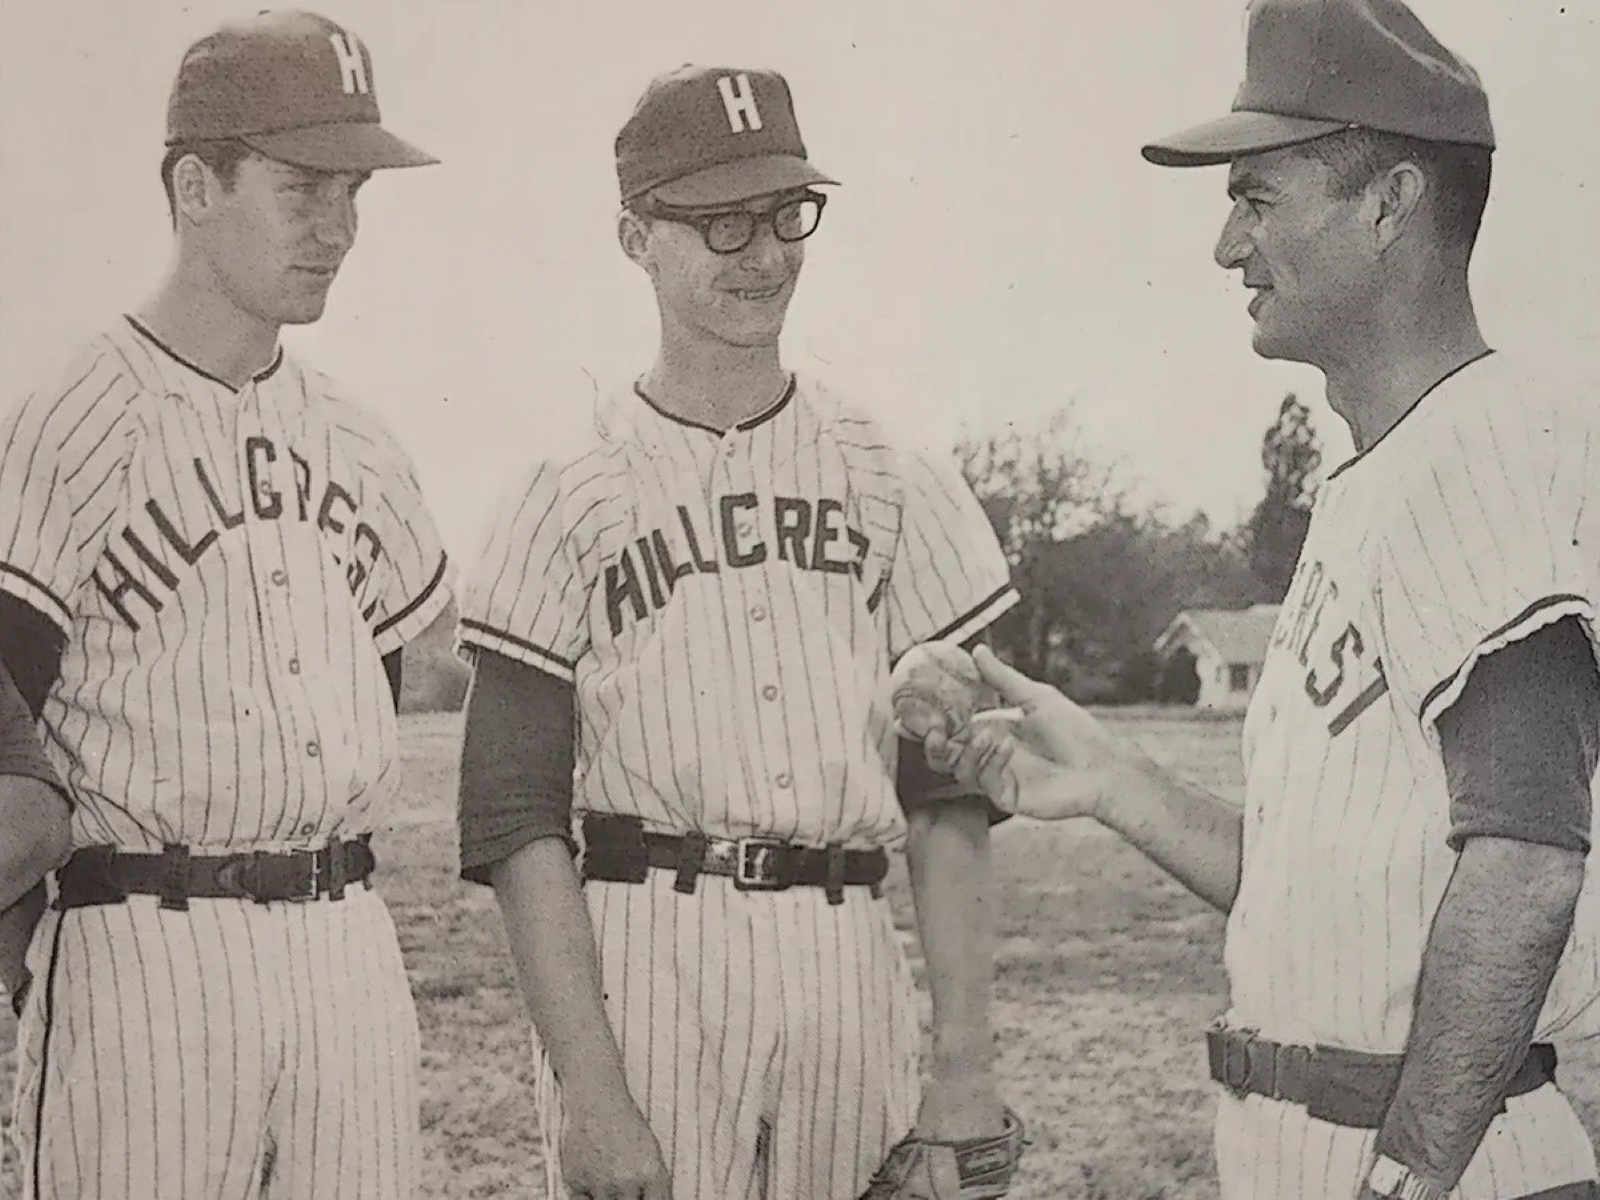 Dick Birmingham was a stickler for fundamentals and execution during his quarter-century leading the baseball program at Hillcrest High School. (Photo by Hillcrest High School)